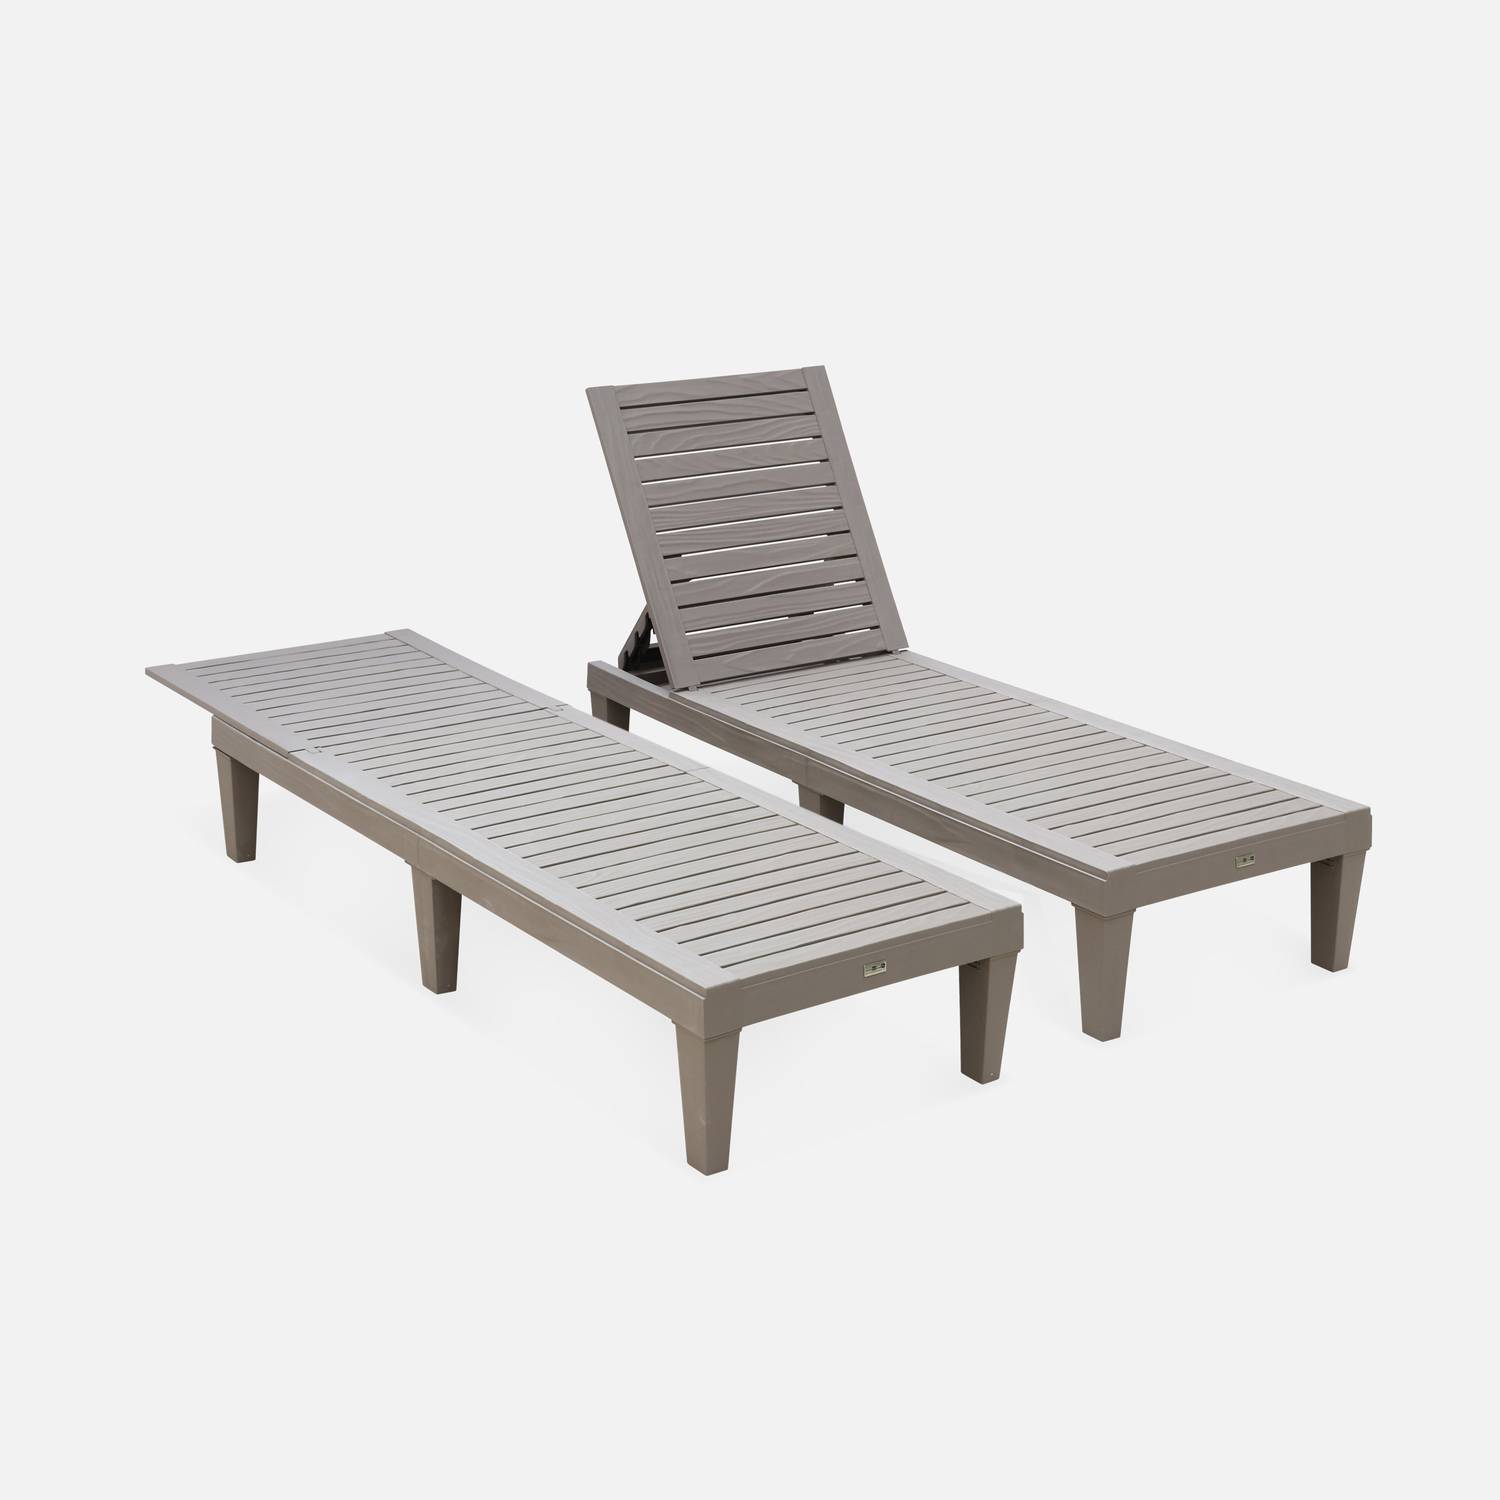 Pair of plastic loungers, multi position sun beds with textured wood effect - Pia - Grey Photo4